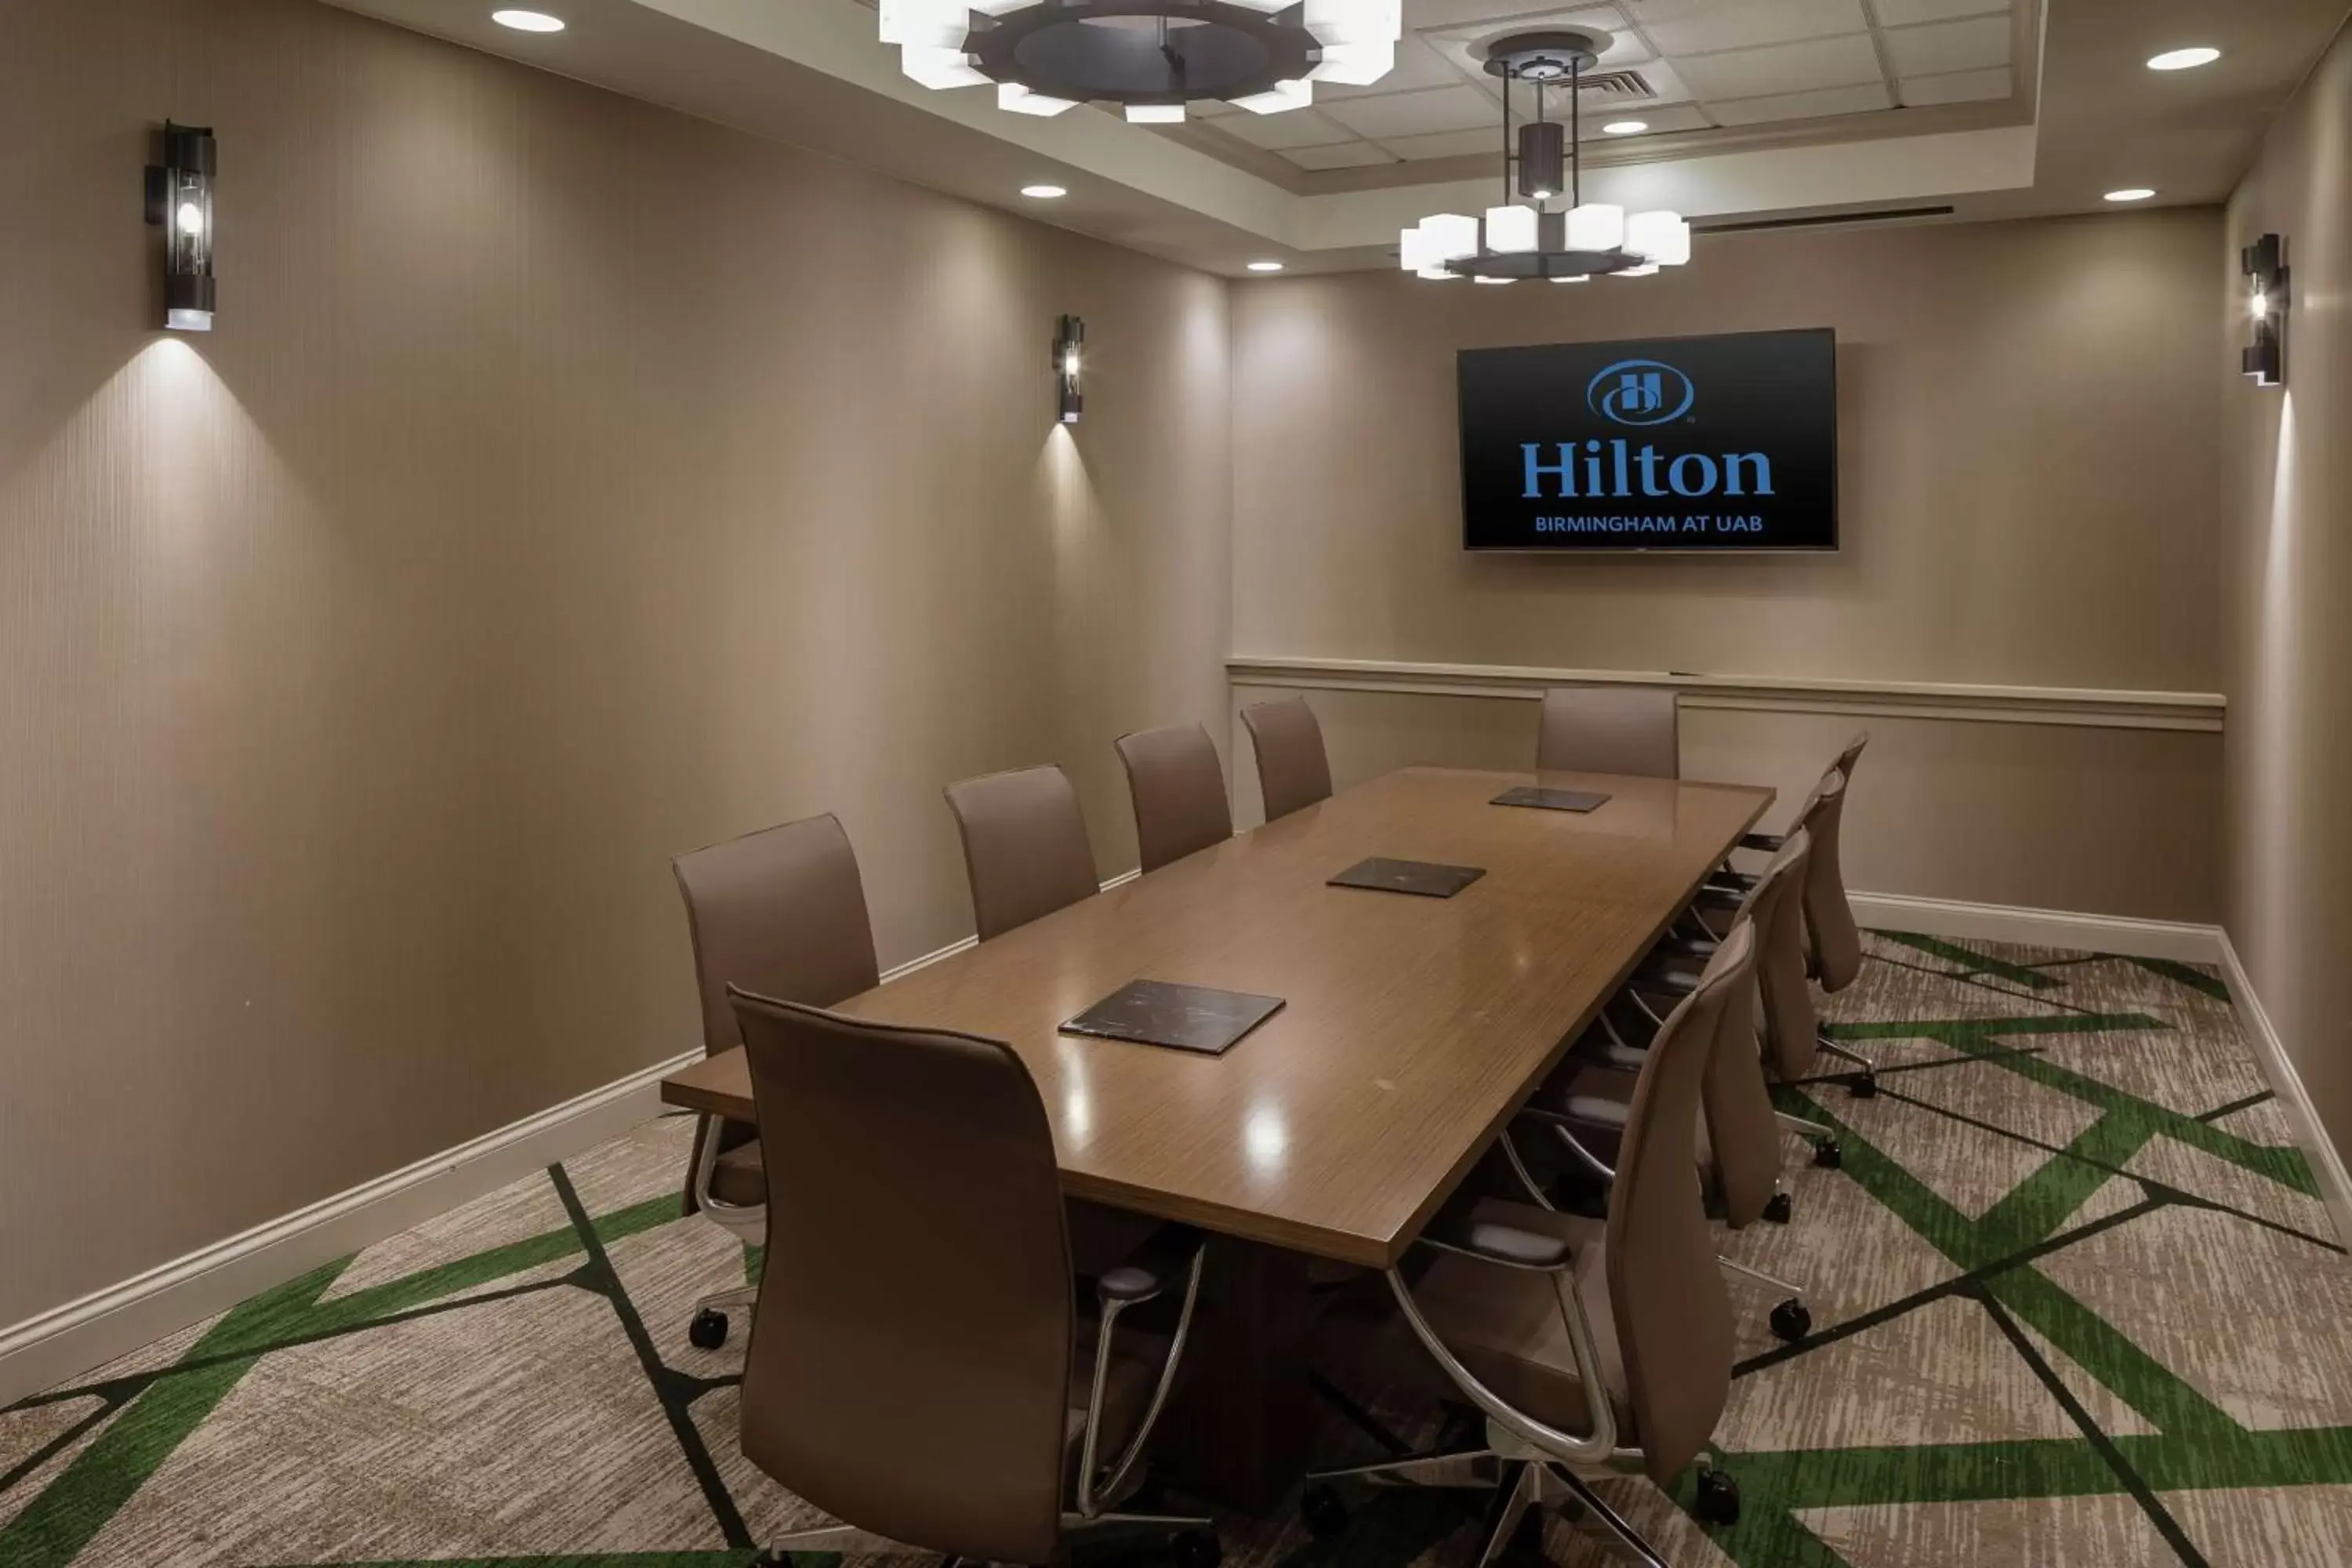 Meeting/conference room in Hilton Birmingham Downtown at UAB